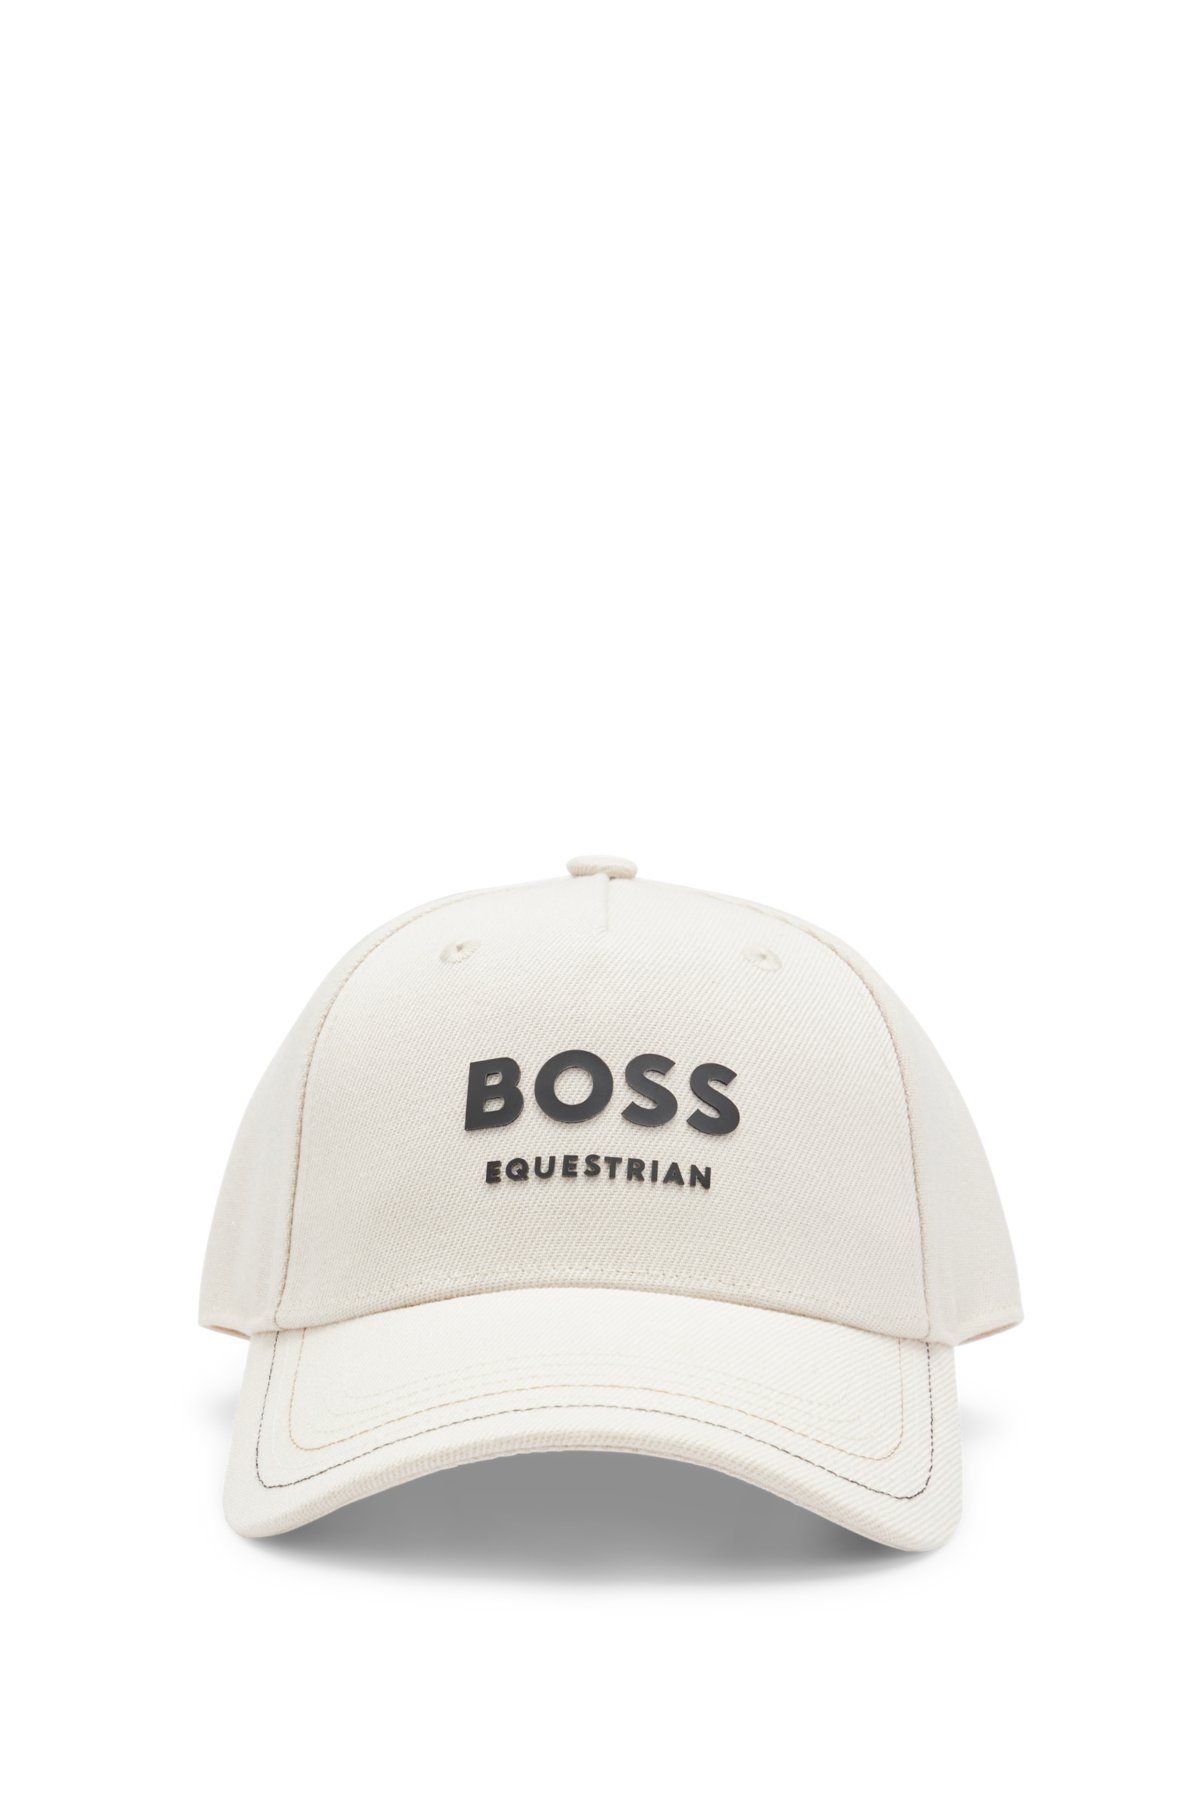 BOSS - Equestrian five-panel cap details logo with